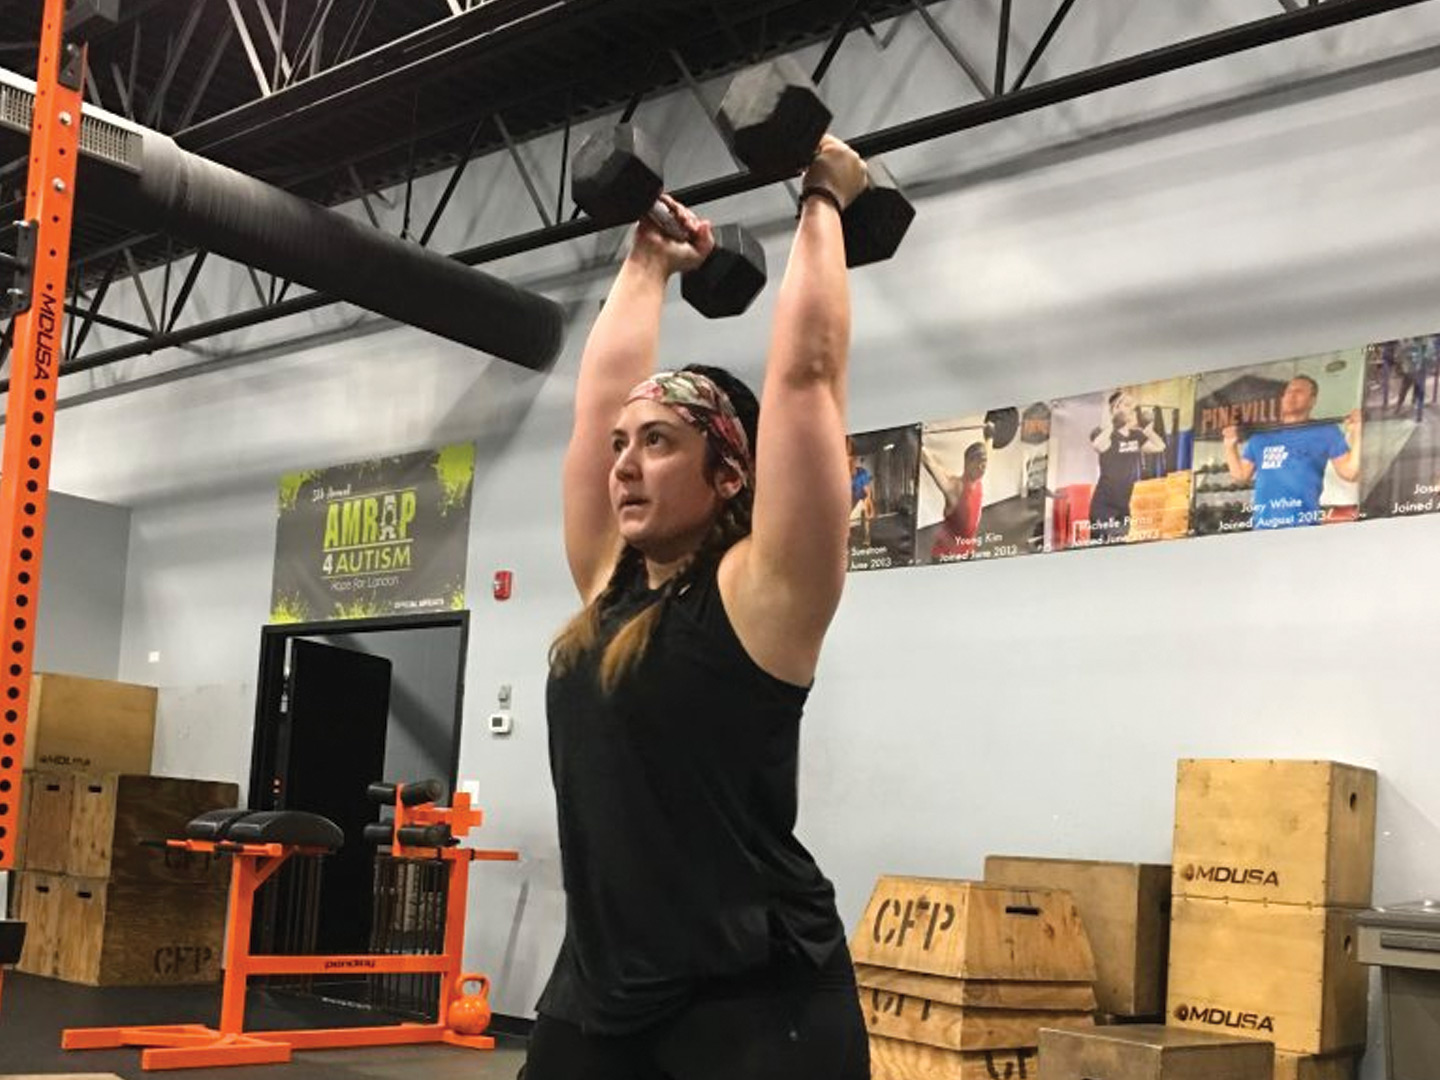 January 2019 Athlete of the Month – Evelyn Karras